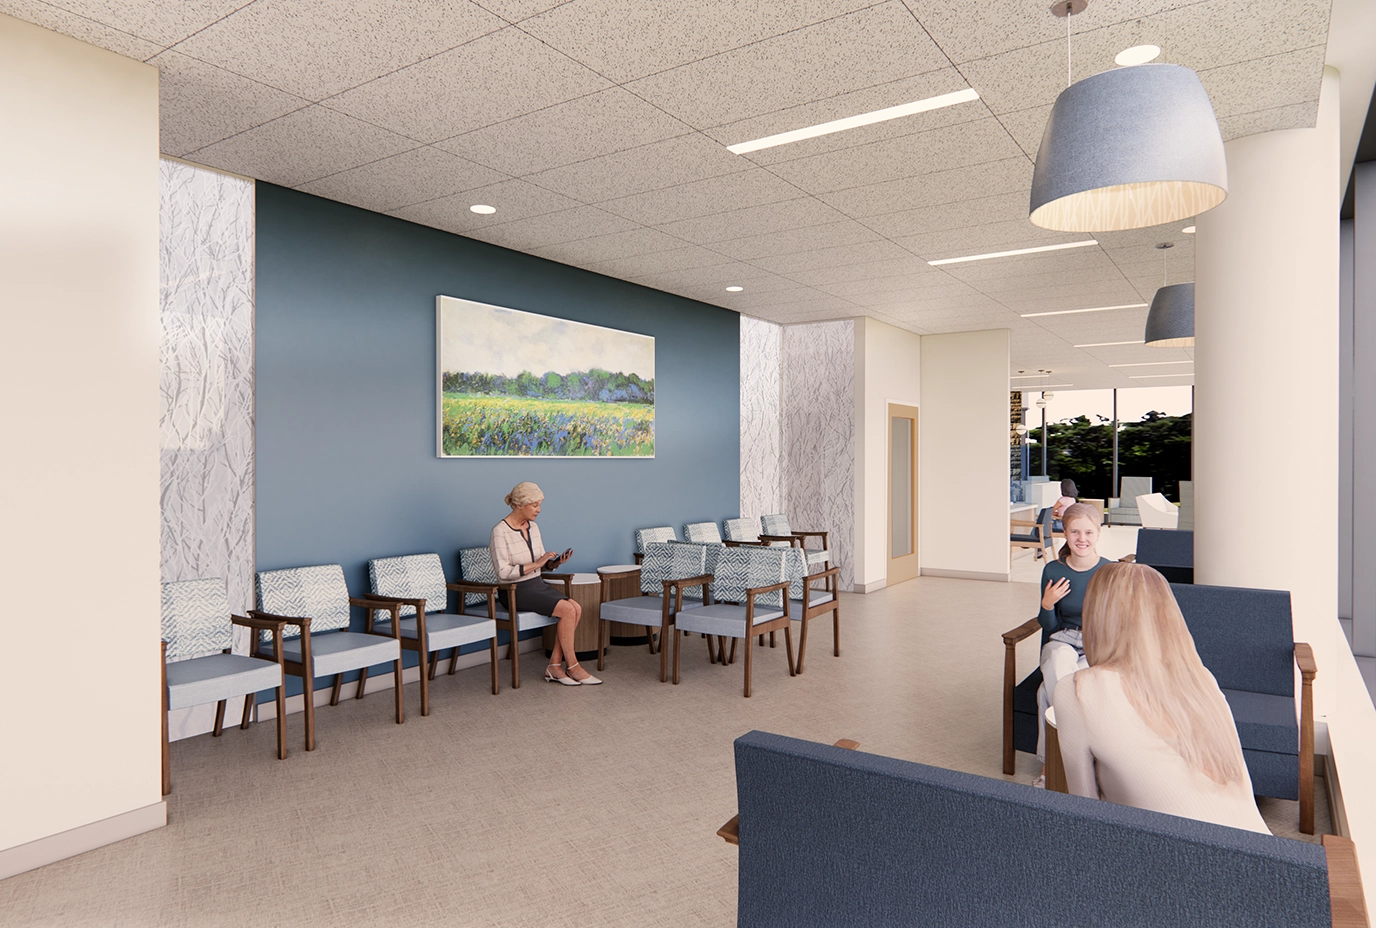 Rendering of the waiting area with several chairs and people waiting